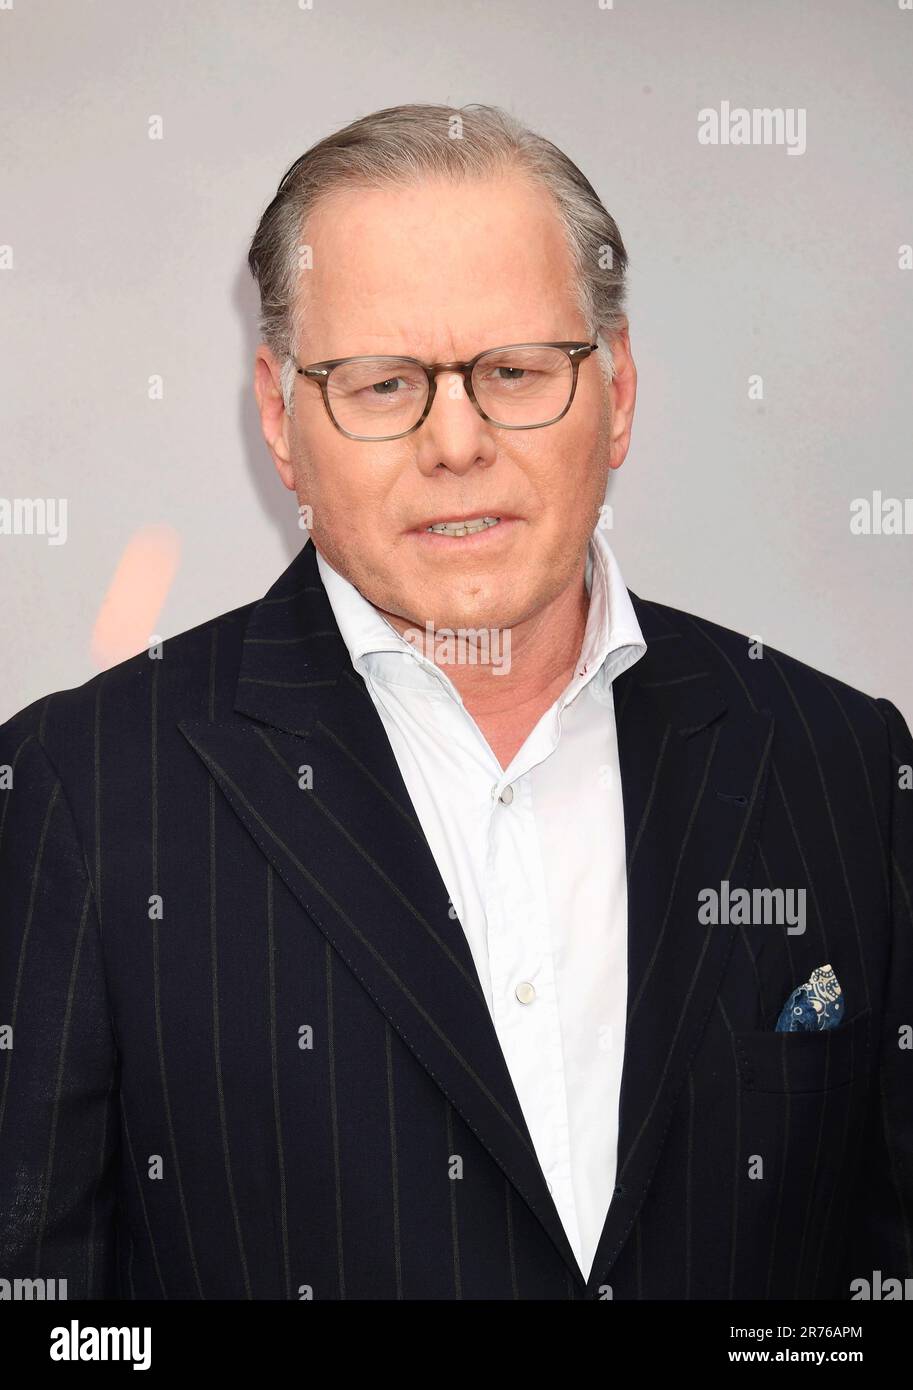 HOLLYWOOD, CALIFORNIA - JUNE 12: CEO Warner Bros. Discovery David Zaslav attends the Los Angeles premiere of Warner Bros. 'The Flash' at Ovation Holly Stock Photo